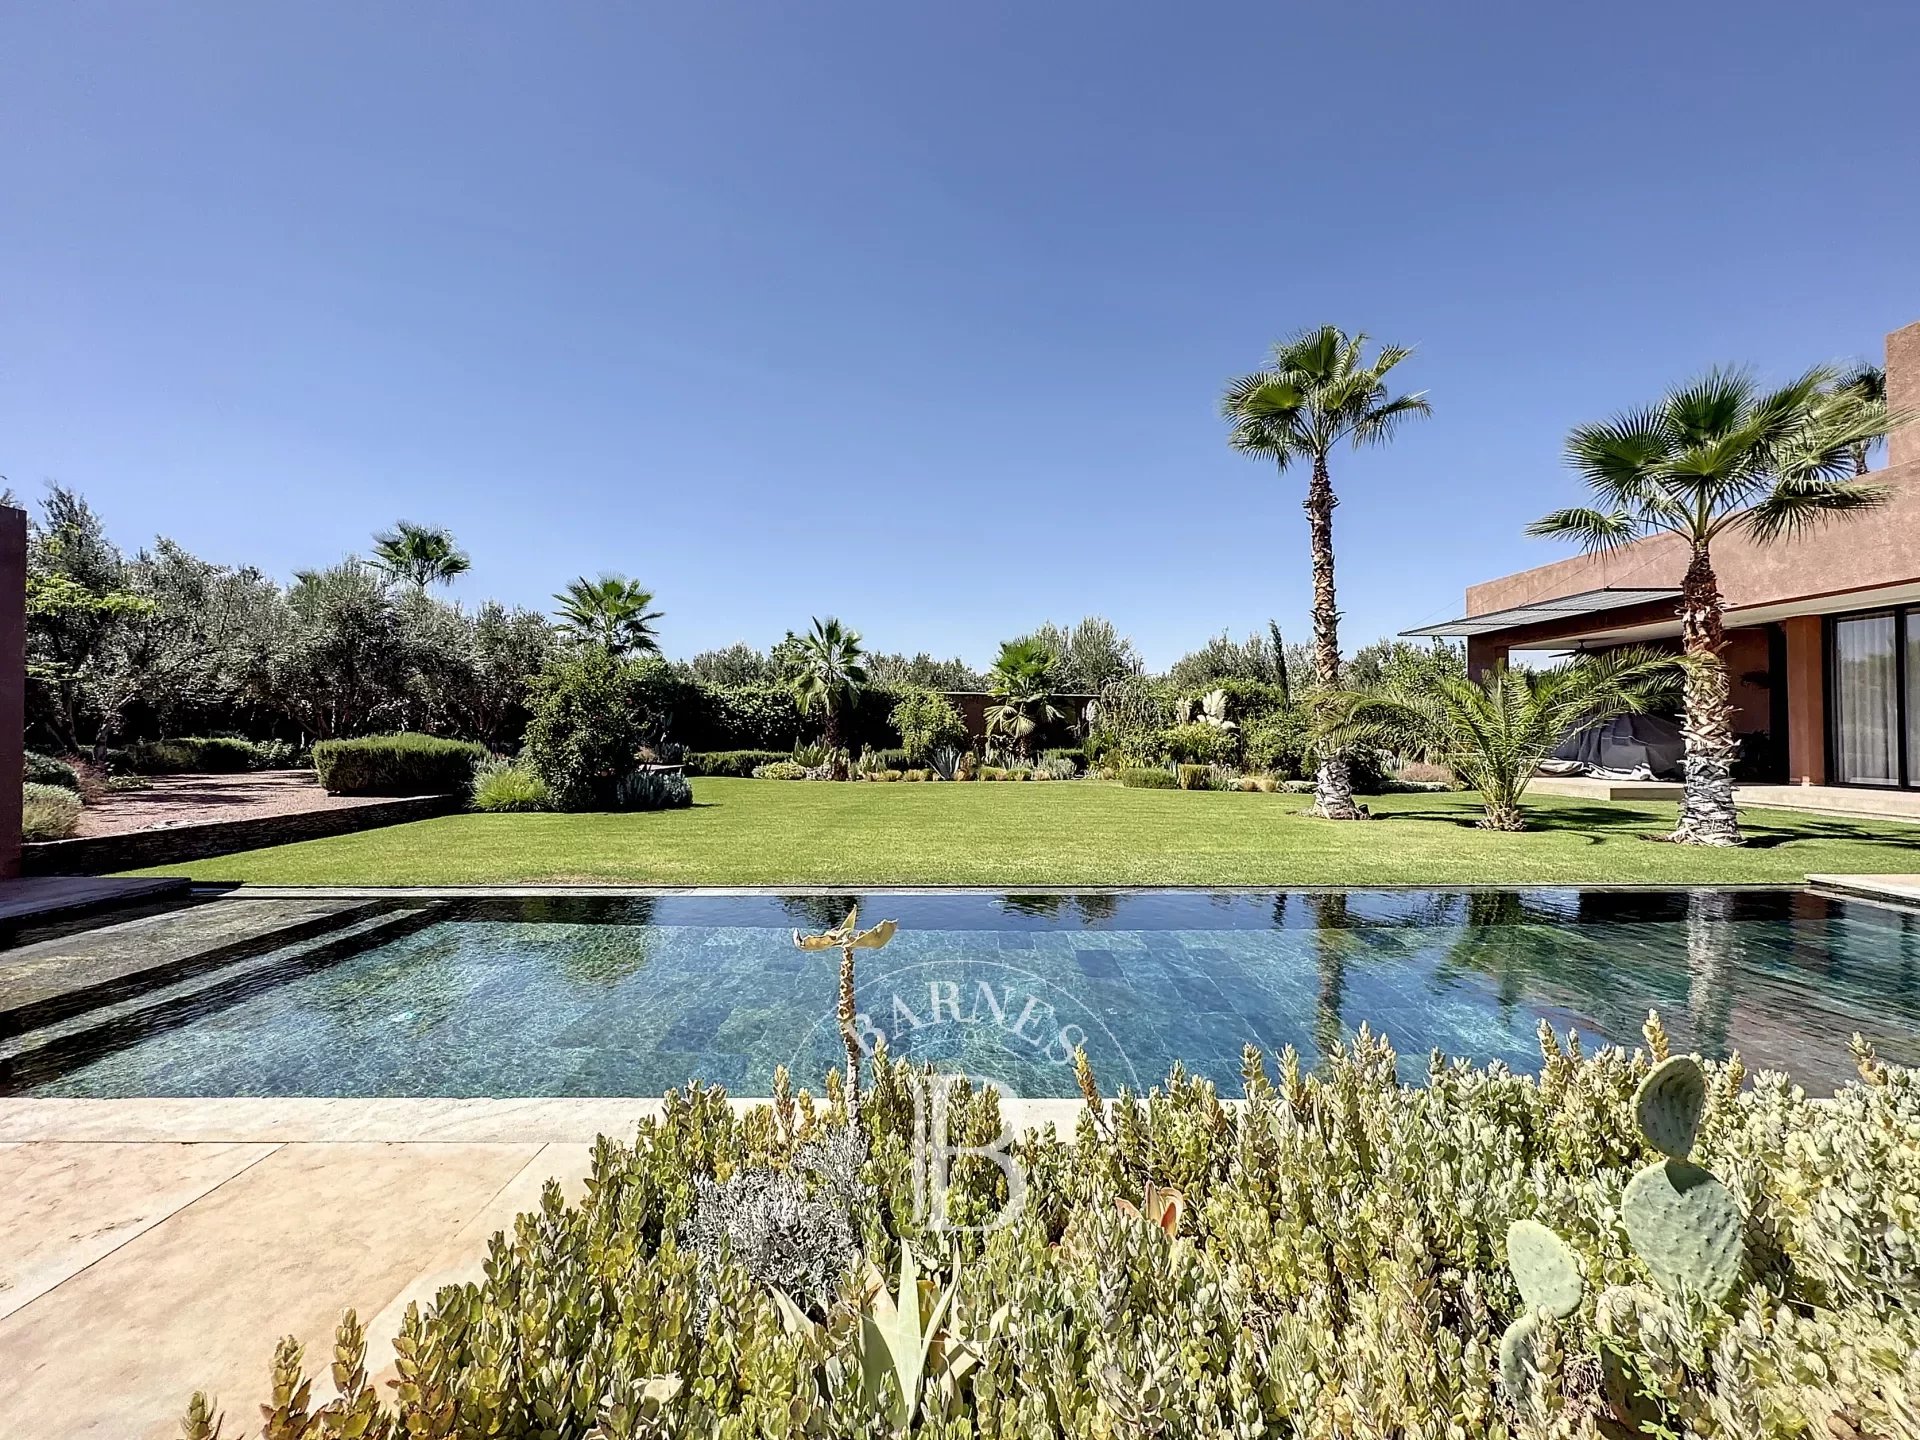 Luxury contemporary villa with infinity pool for sale on the Ourika road in Marrakech. - picture 2 title=